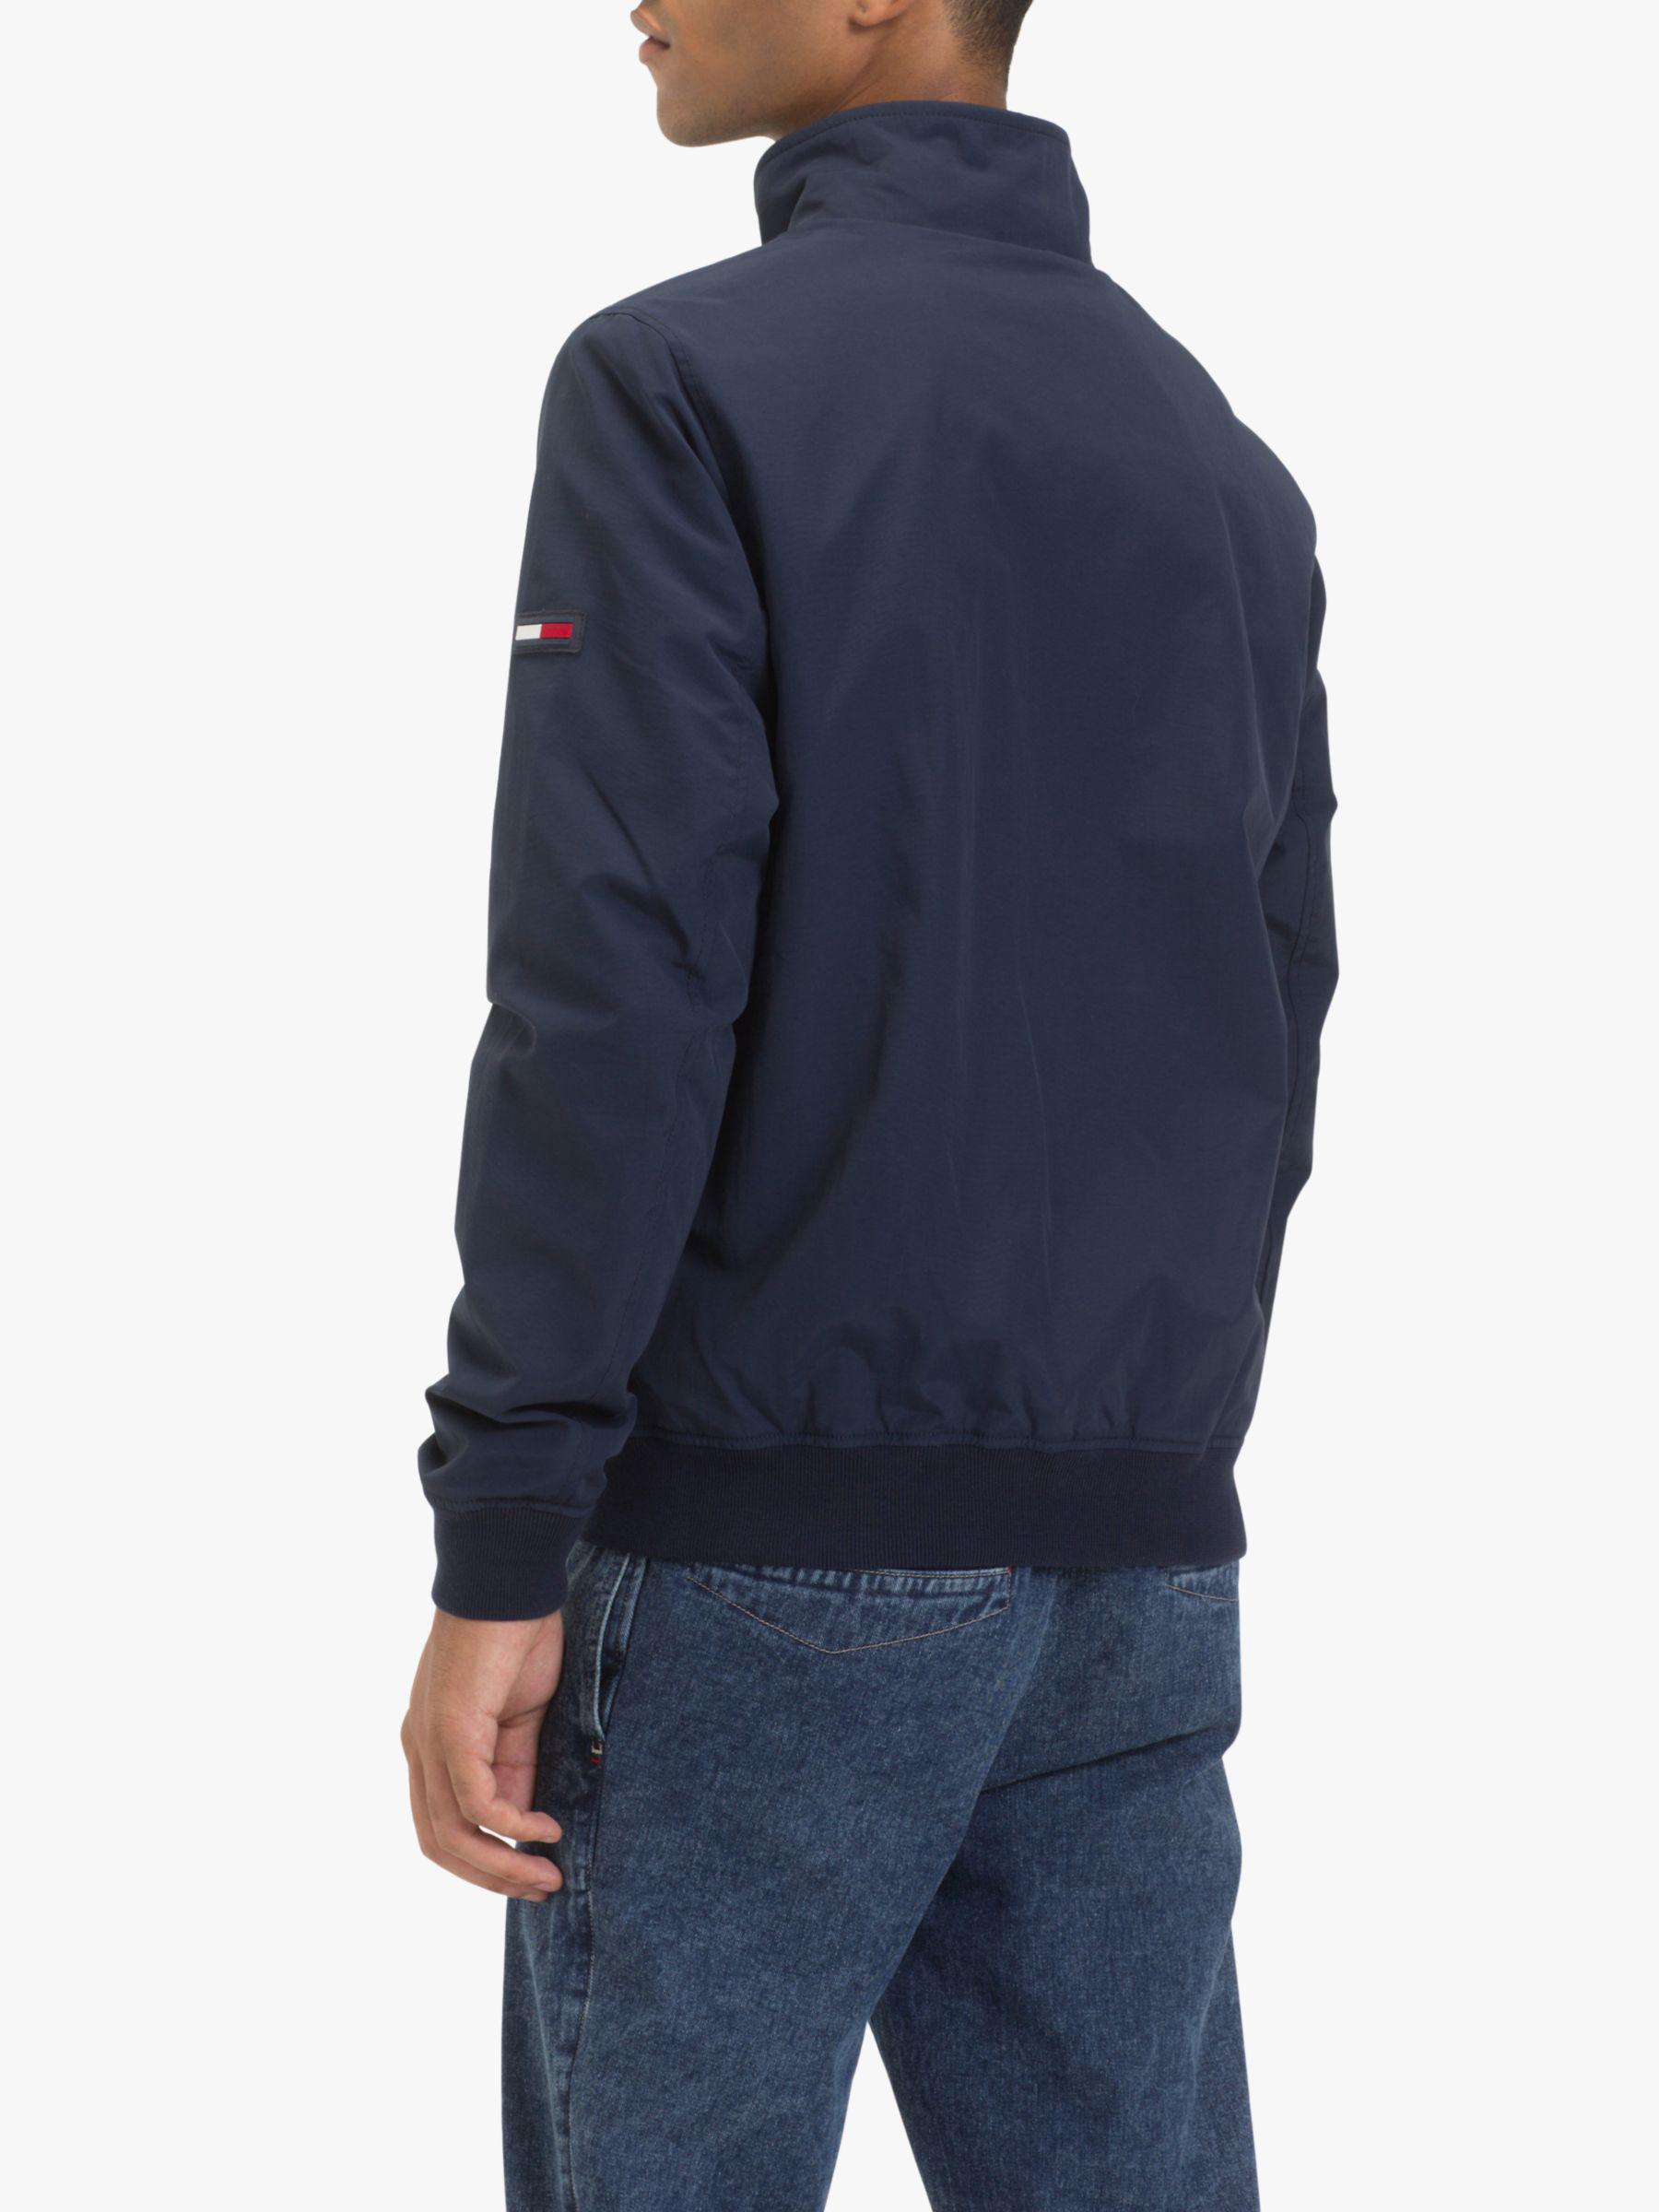 tommy jeans essential casual bomber jacket